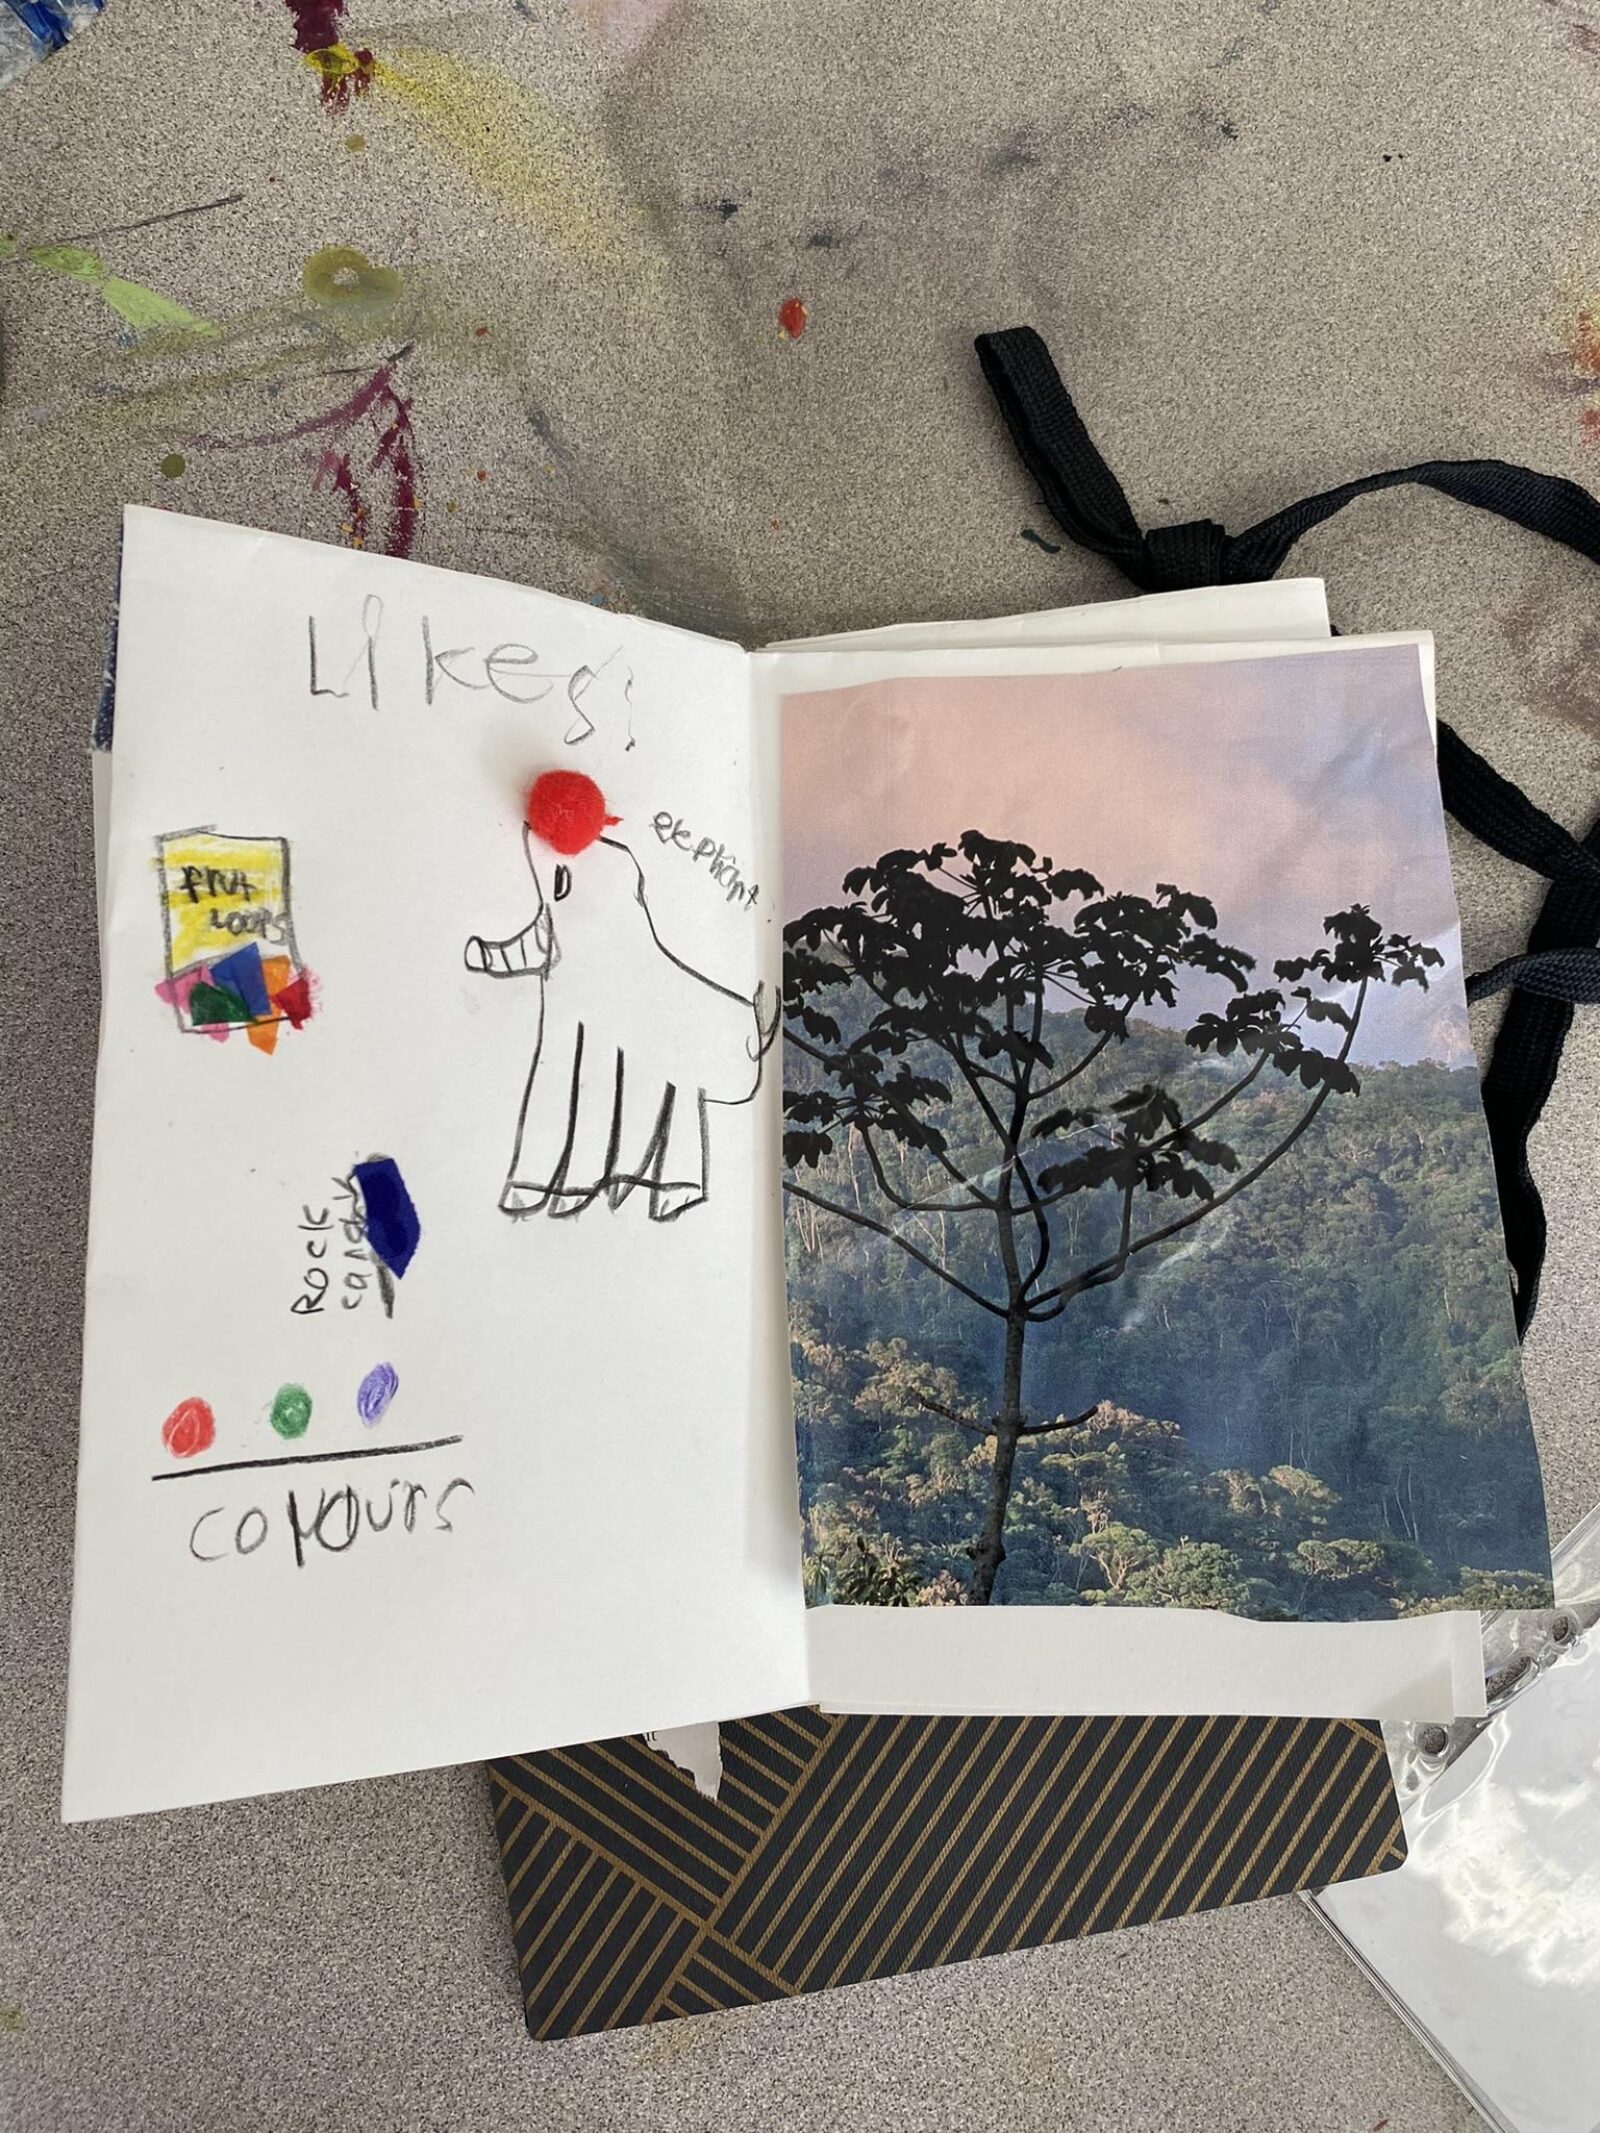 a child's book with collage elements and drawings